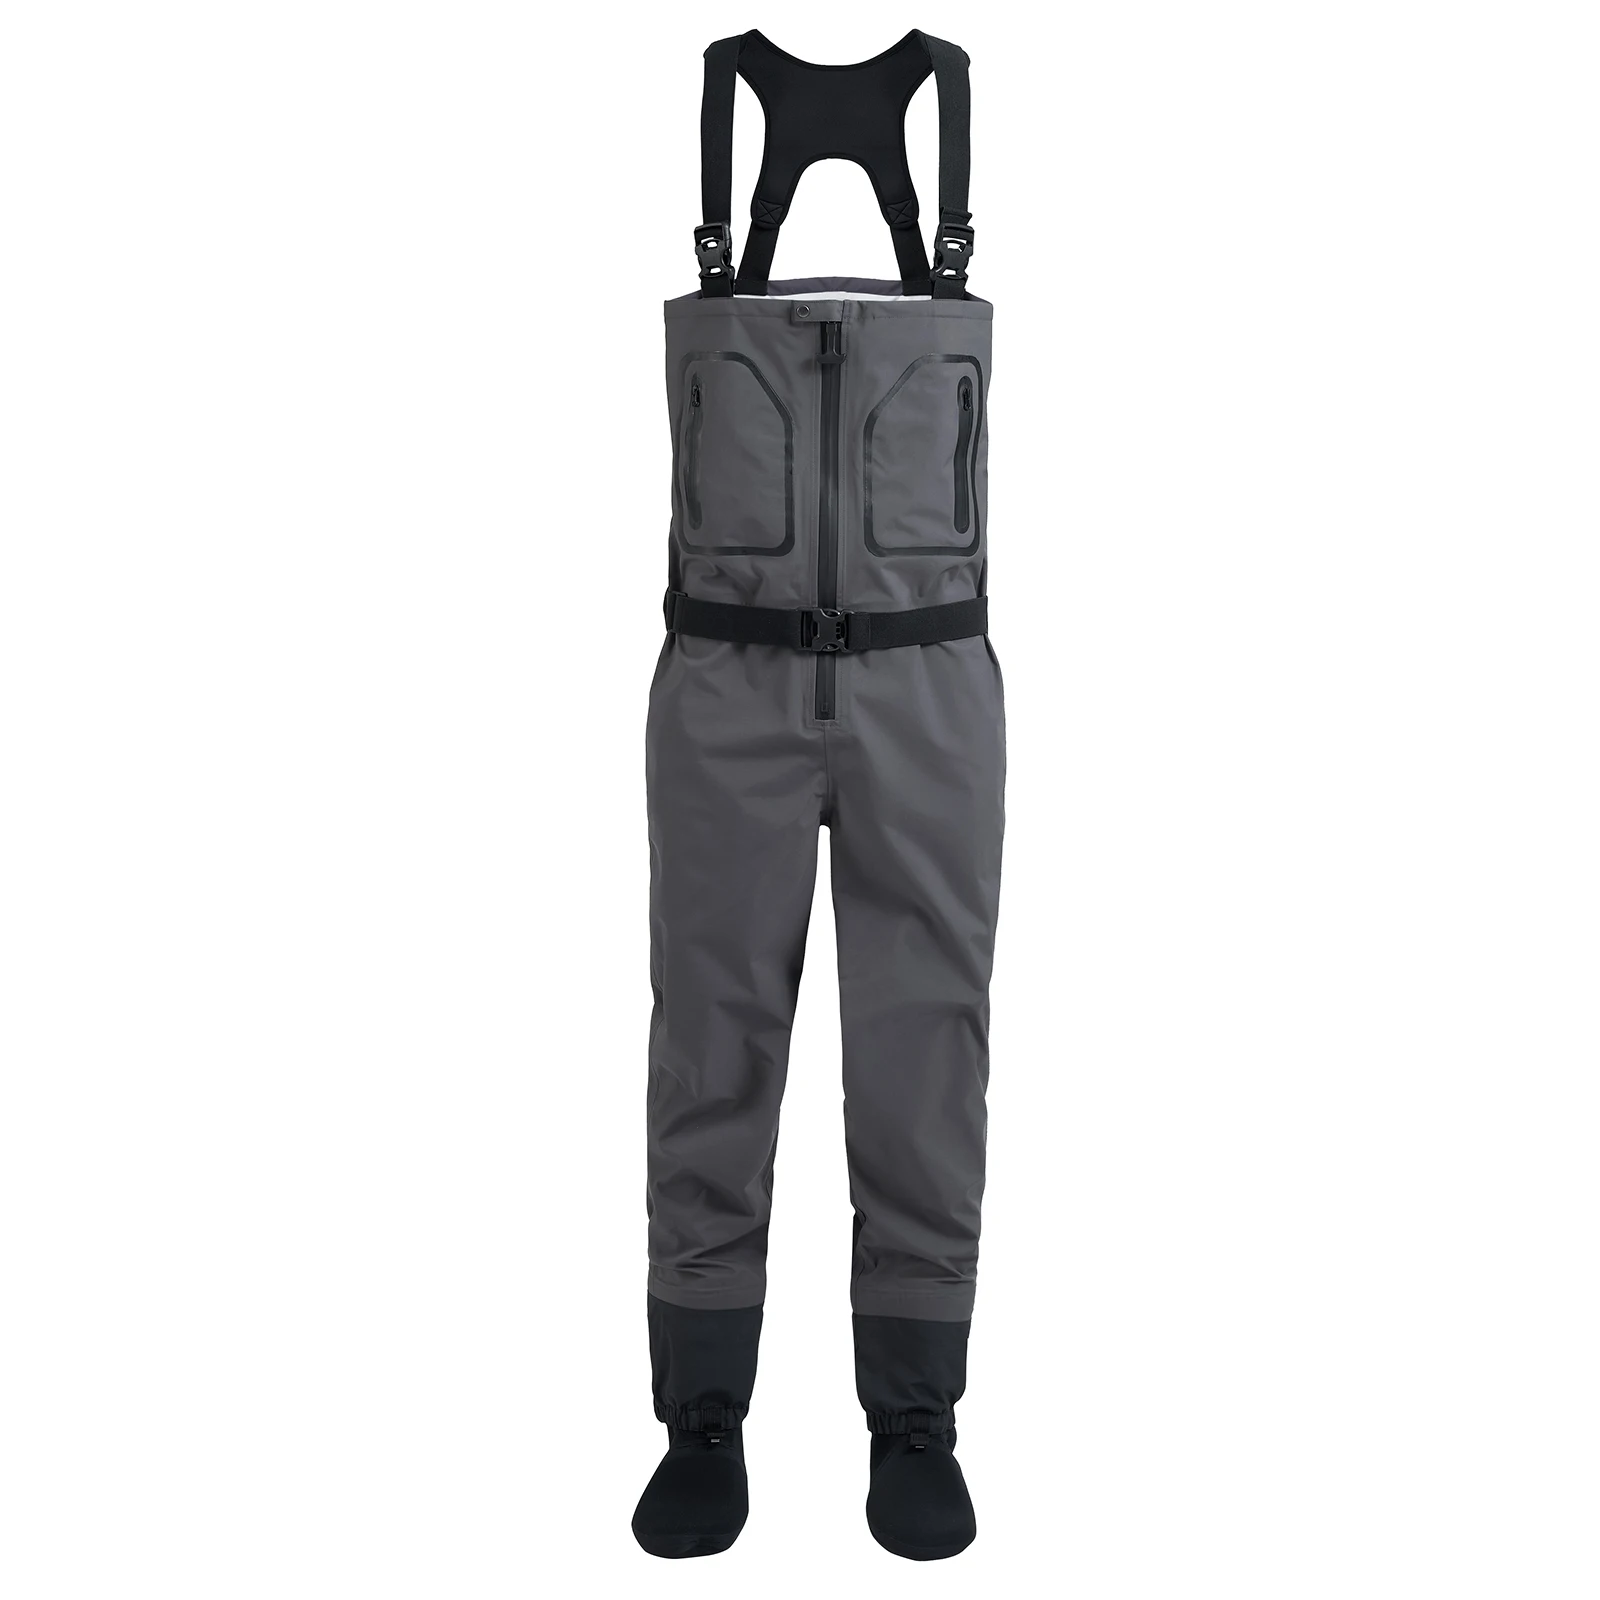 New Men's Fishing Chest  High Quality Waders Waterproof Breathable One-piece Pants With Neoprene Socks For Enjoy  WM2